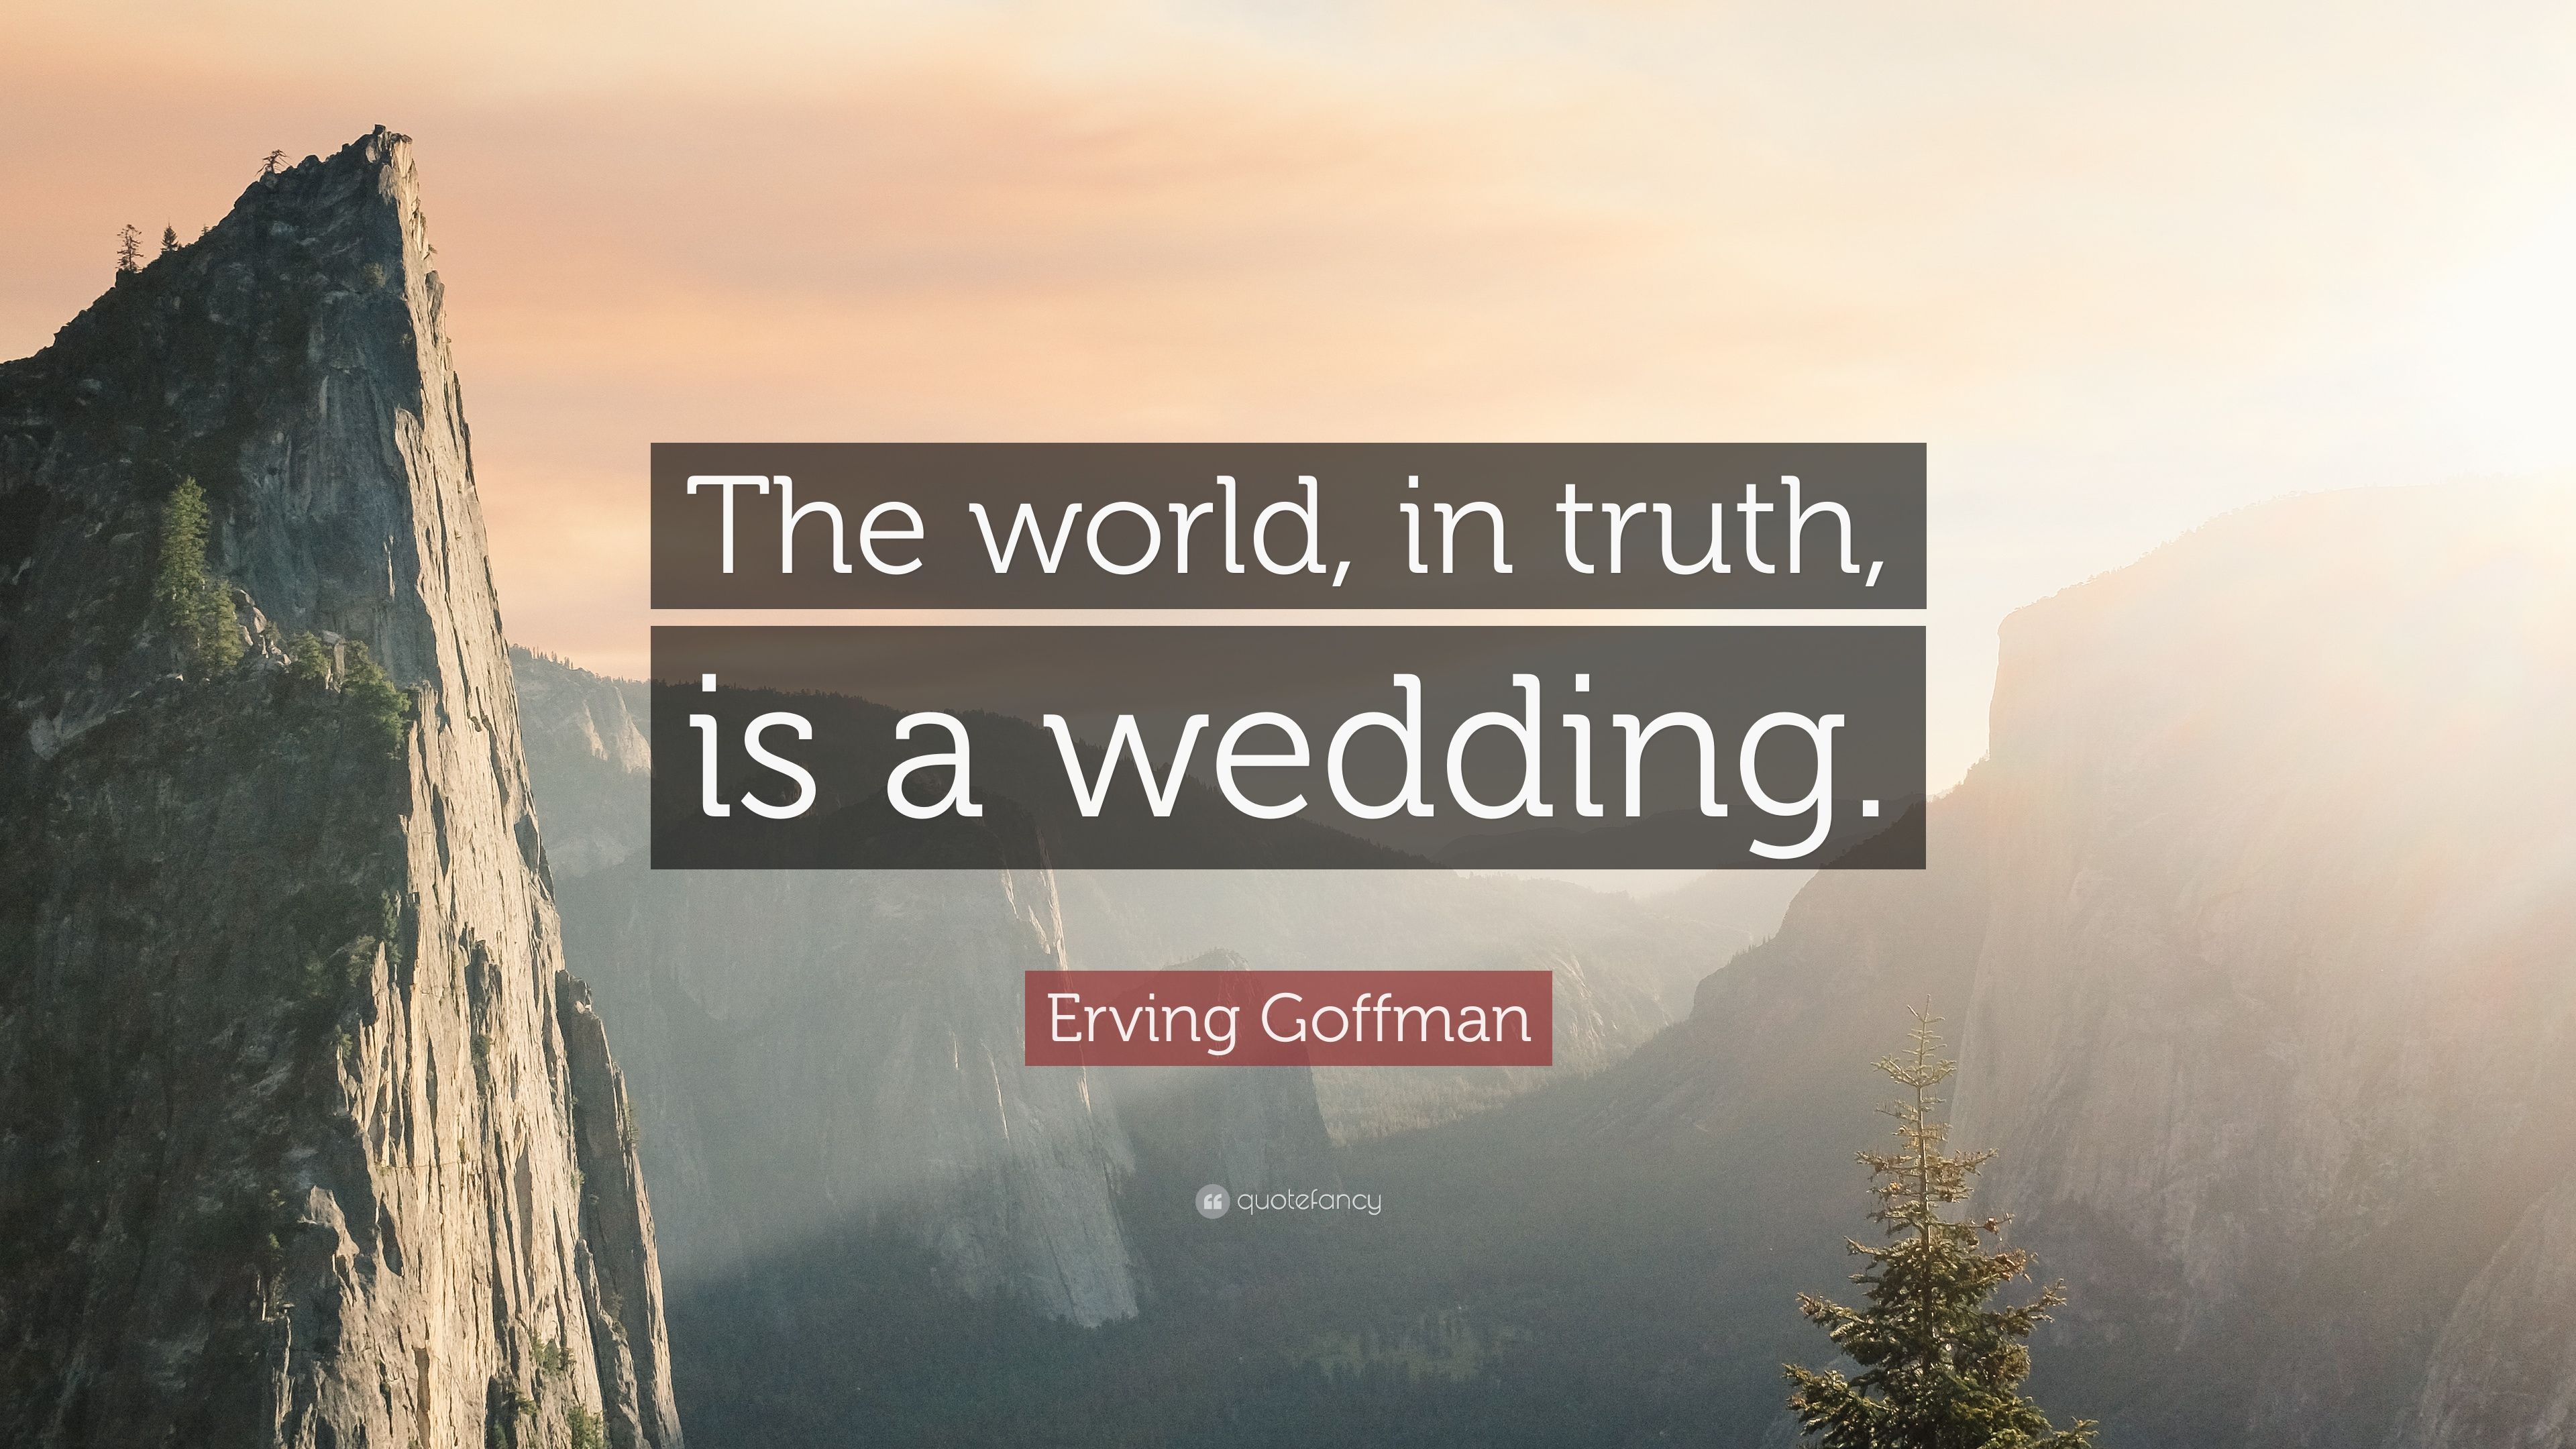 Erving Goffman Quote: "The world, in truth, is a wedding. 